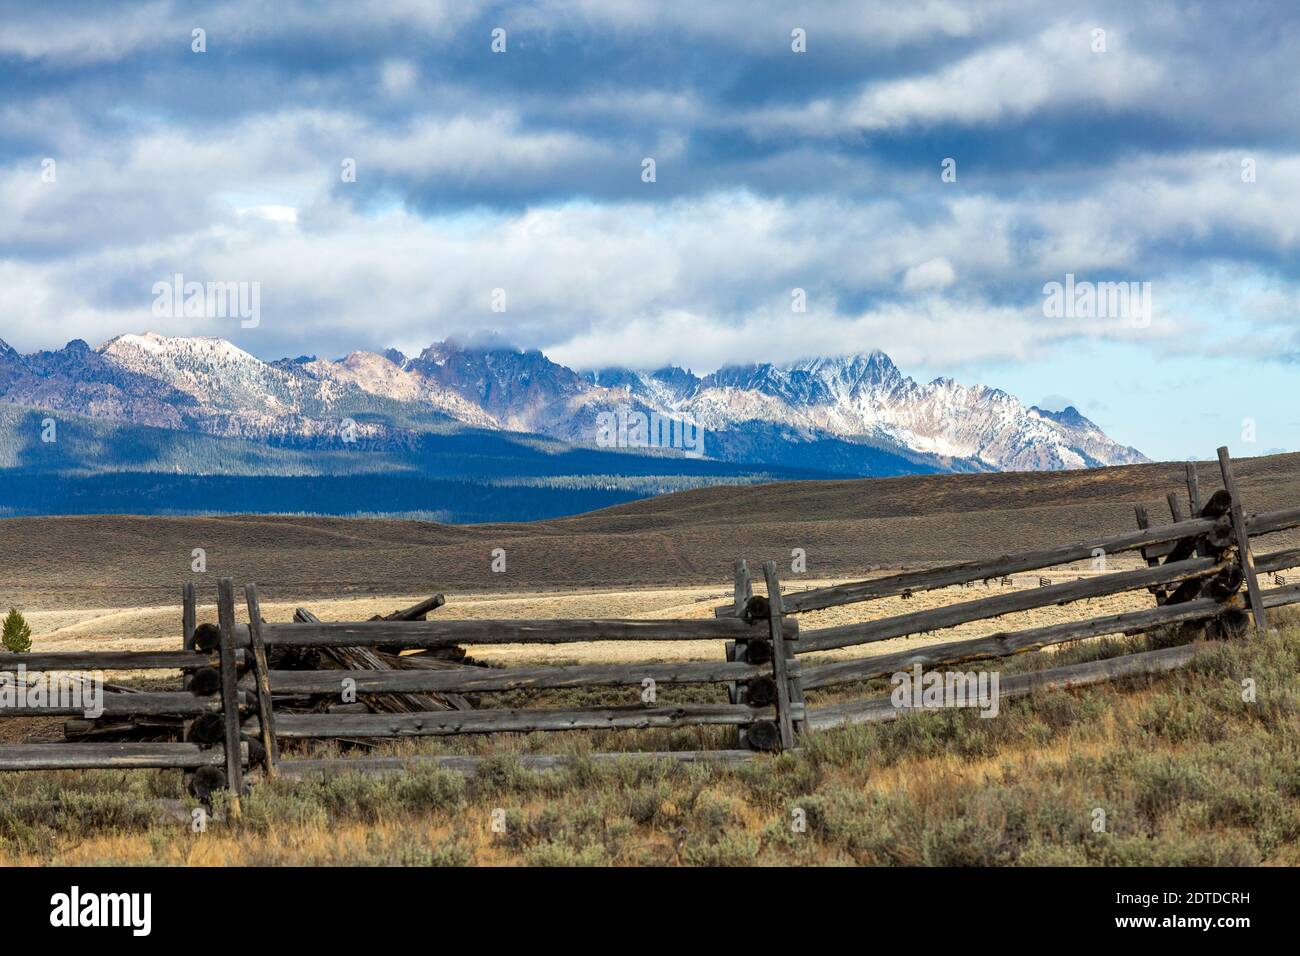 USA, Idaho, Stanley, Ranch landscape with mountains and clouds Stock Photo